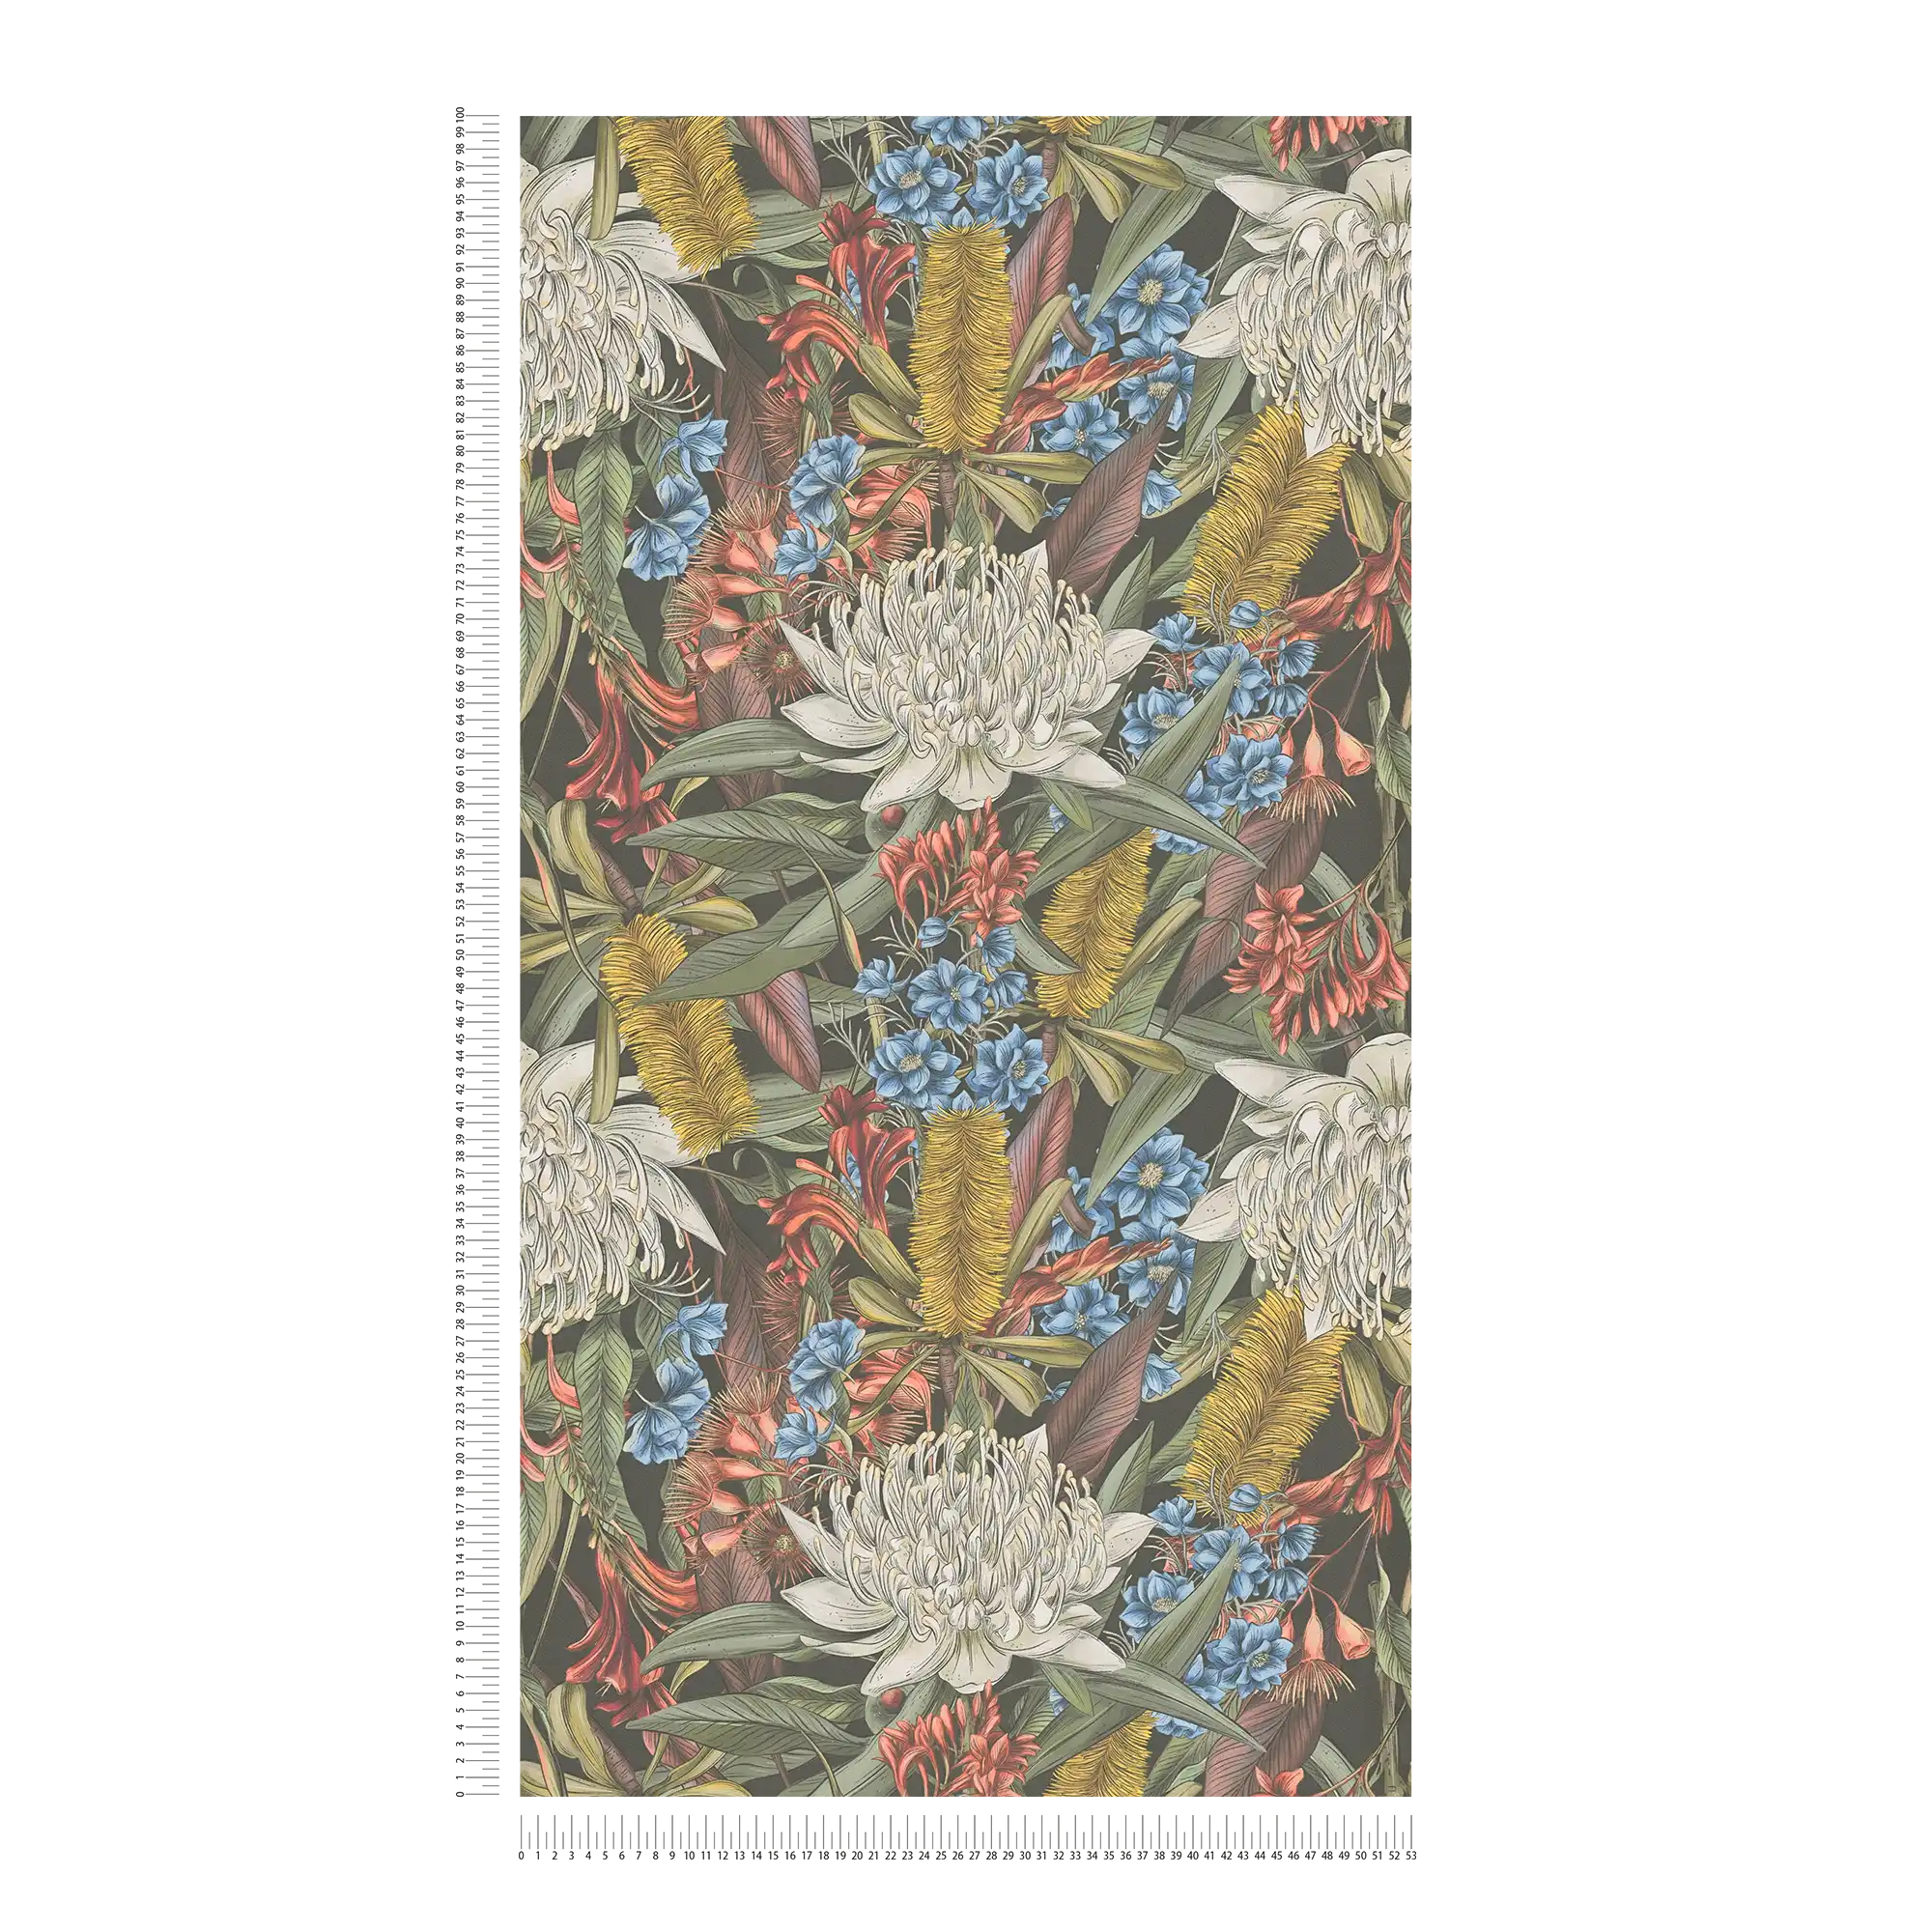             Floral jungle wallpaper with leaves & flowers textured matt - multicoloured, black, green
        